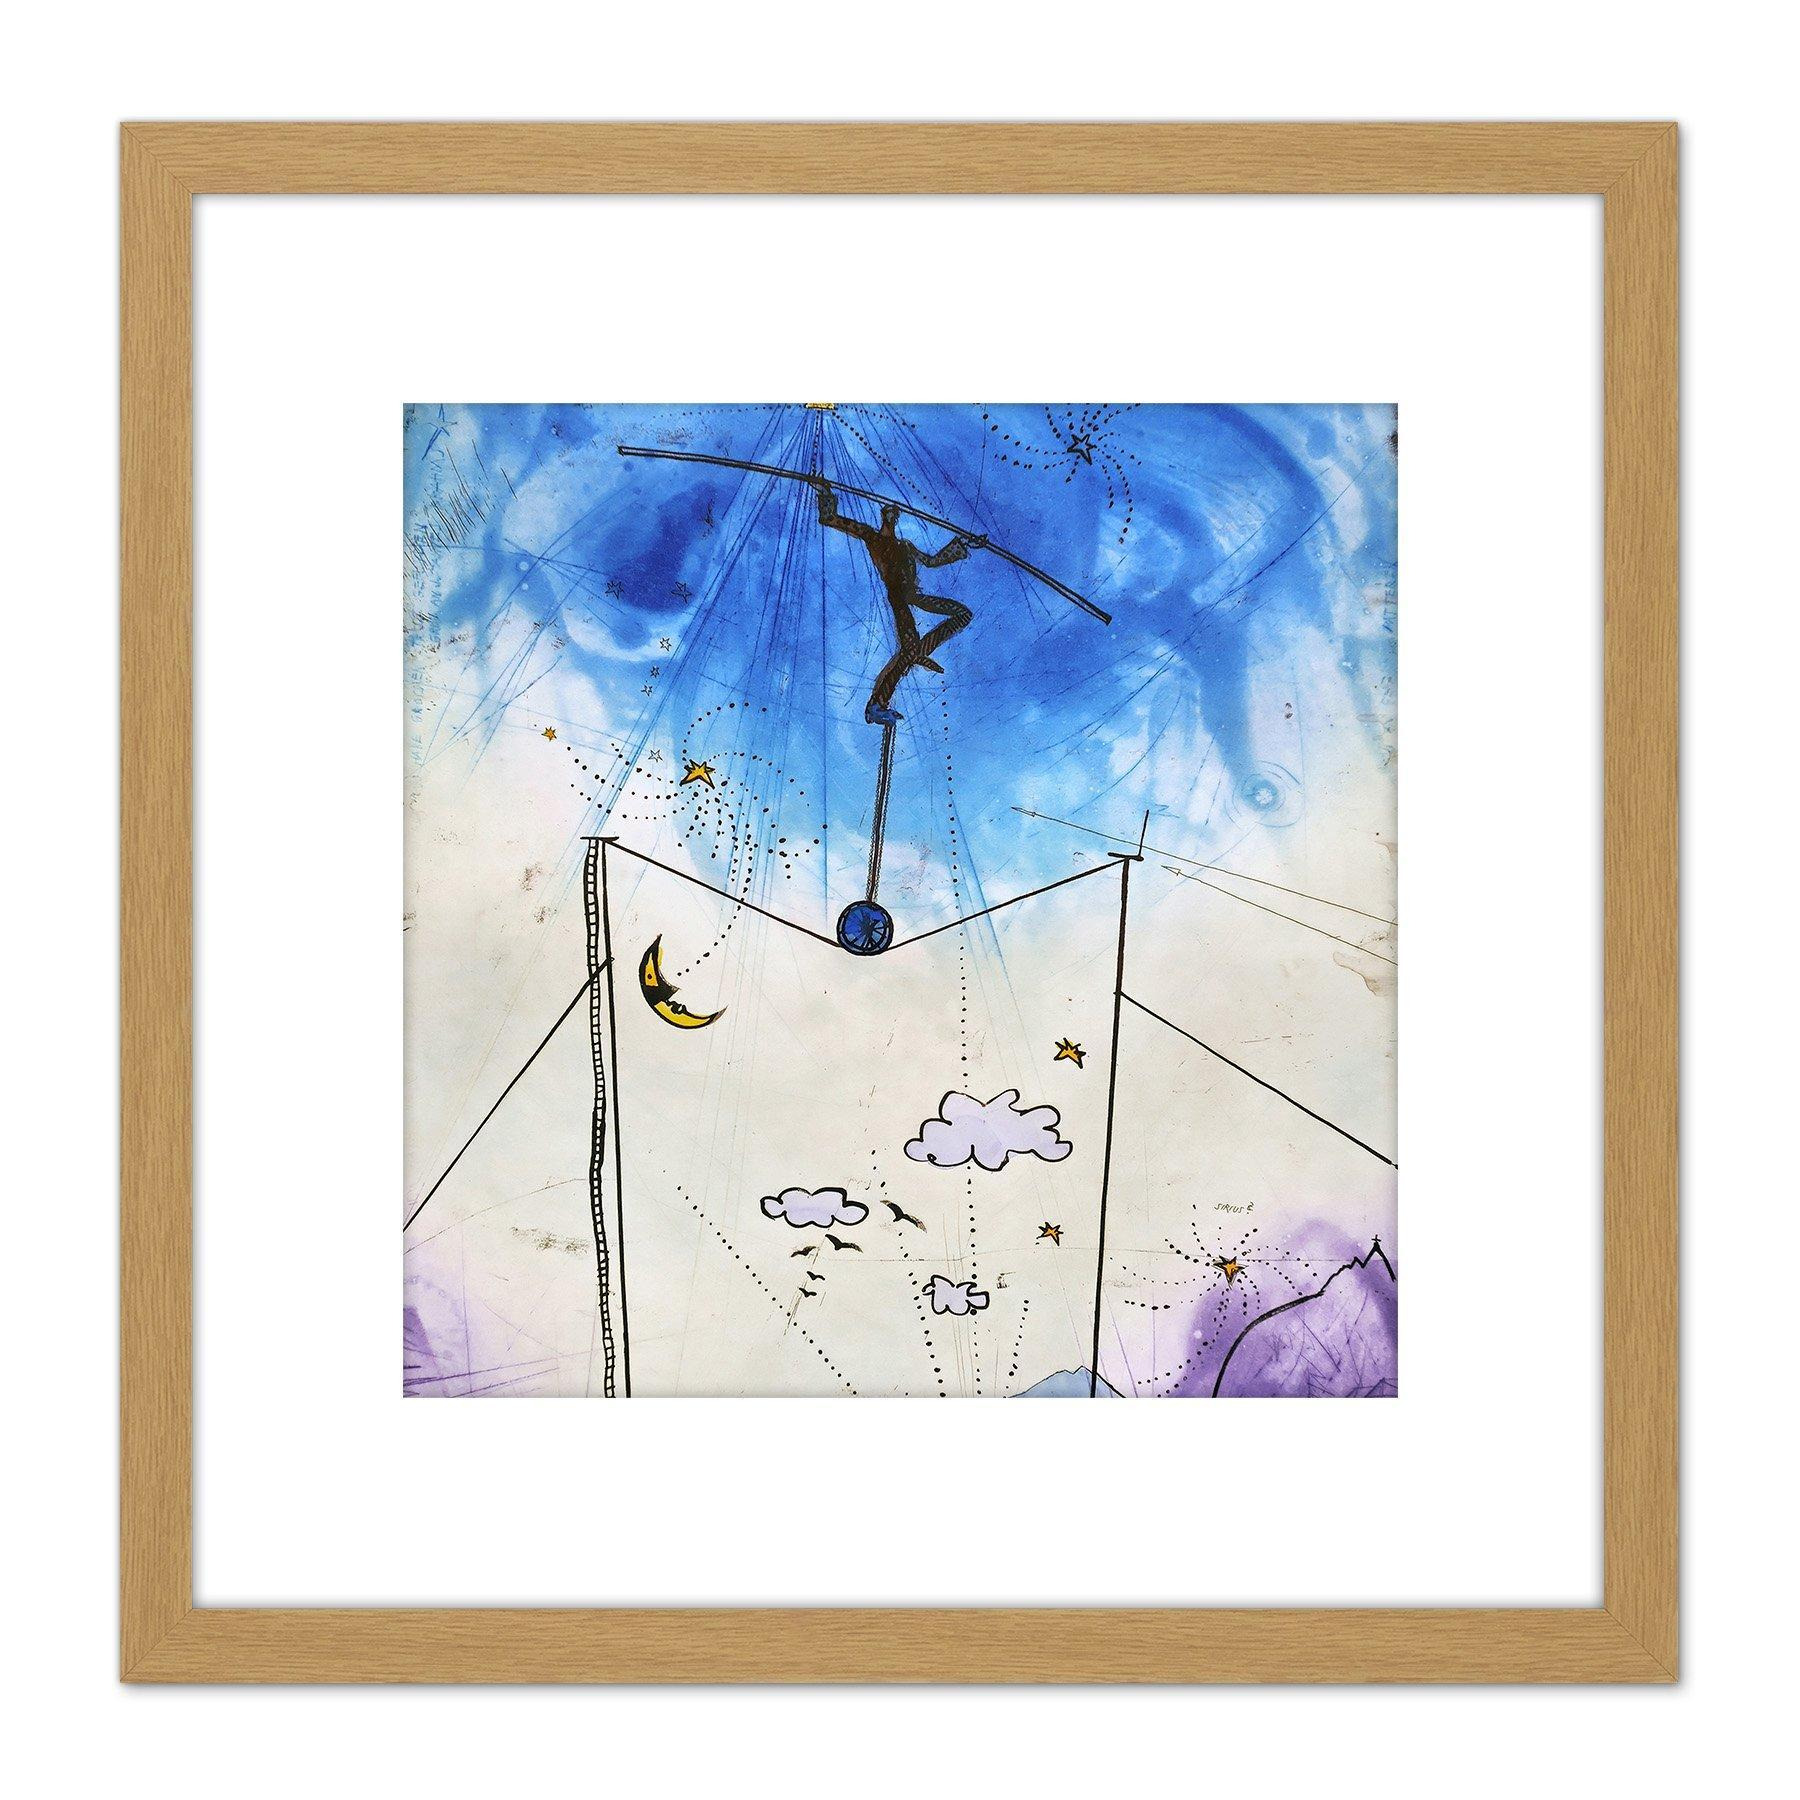 Adi Holzer 850 Lebenslauf Life Tightrope Walking Painting 8X8 Inch Square Wooden Framed Wall Art Print Picture with Mount - image 1